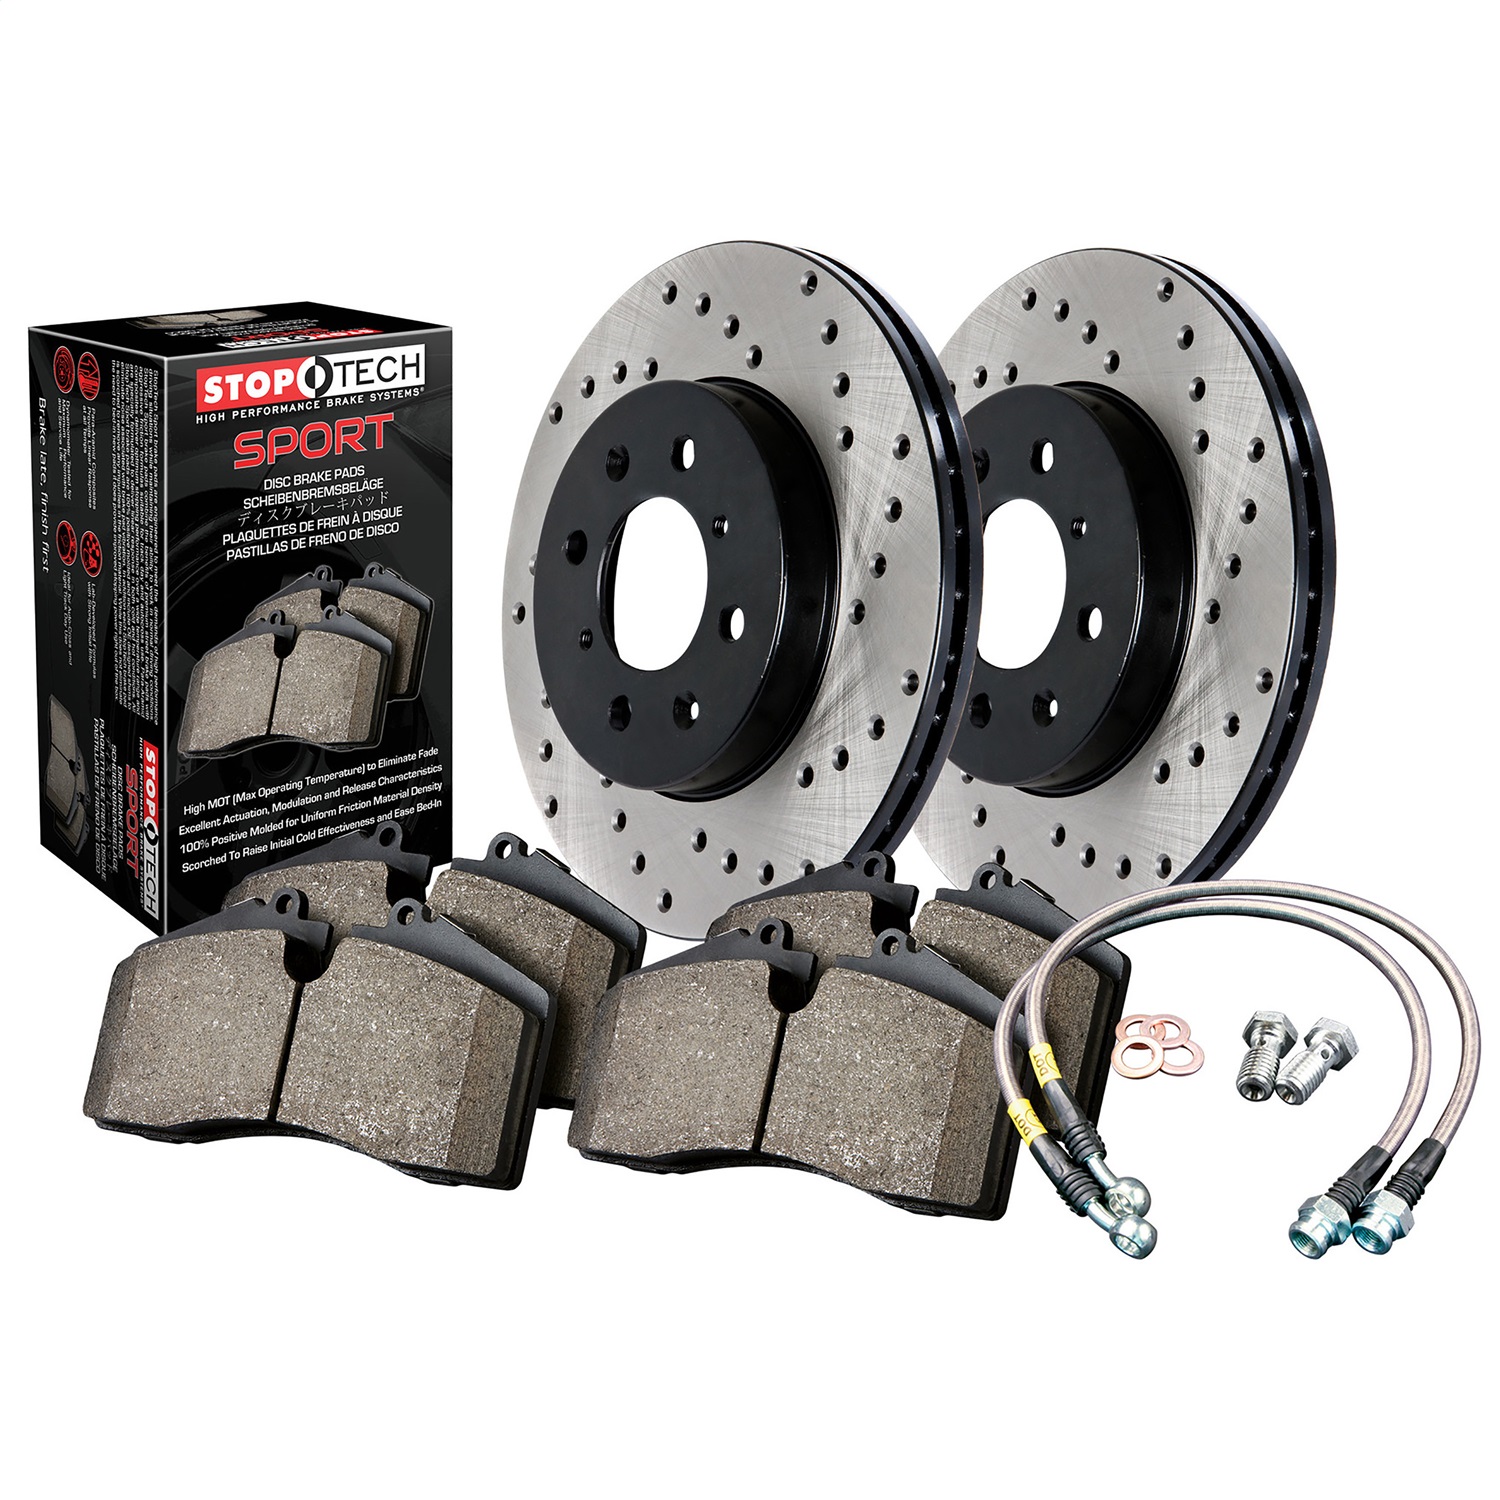 StopTech 979.33020R Sport Disc Brake Kit w/Cross-Drilled Rotor Fits Q5 S4 S5 SQ5